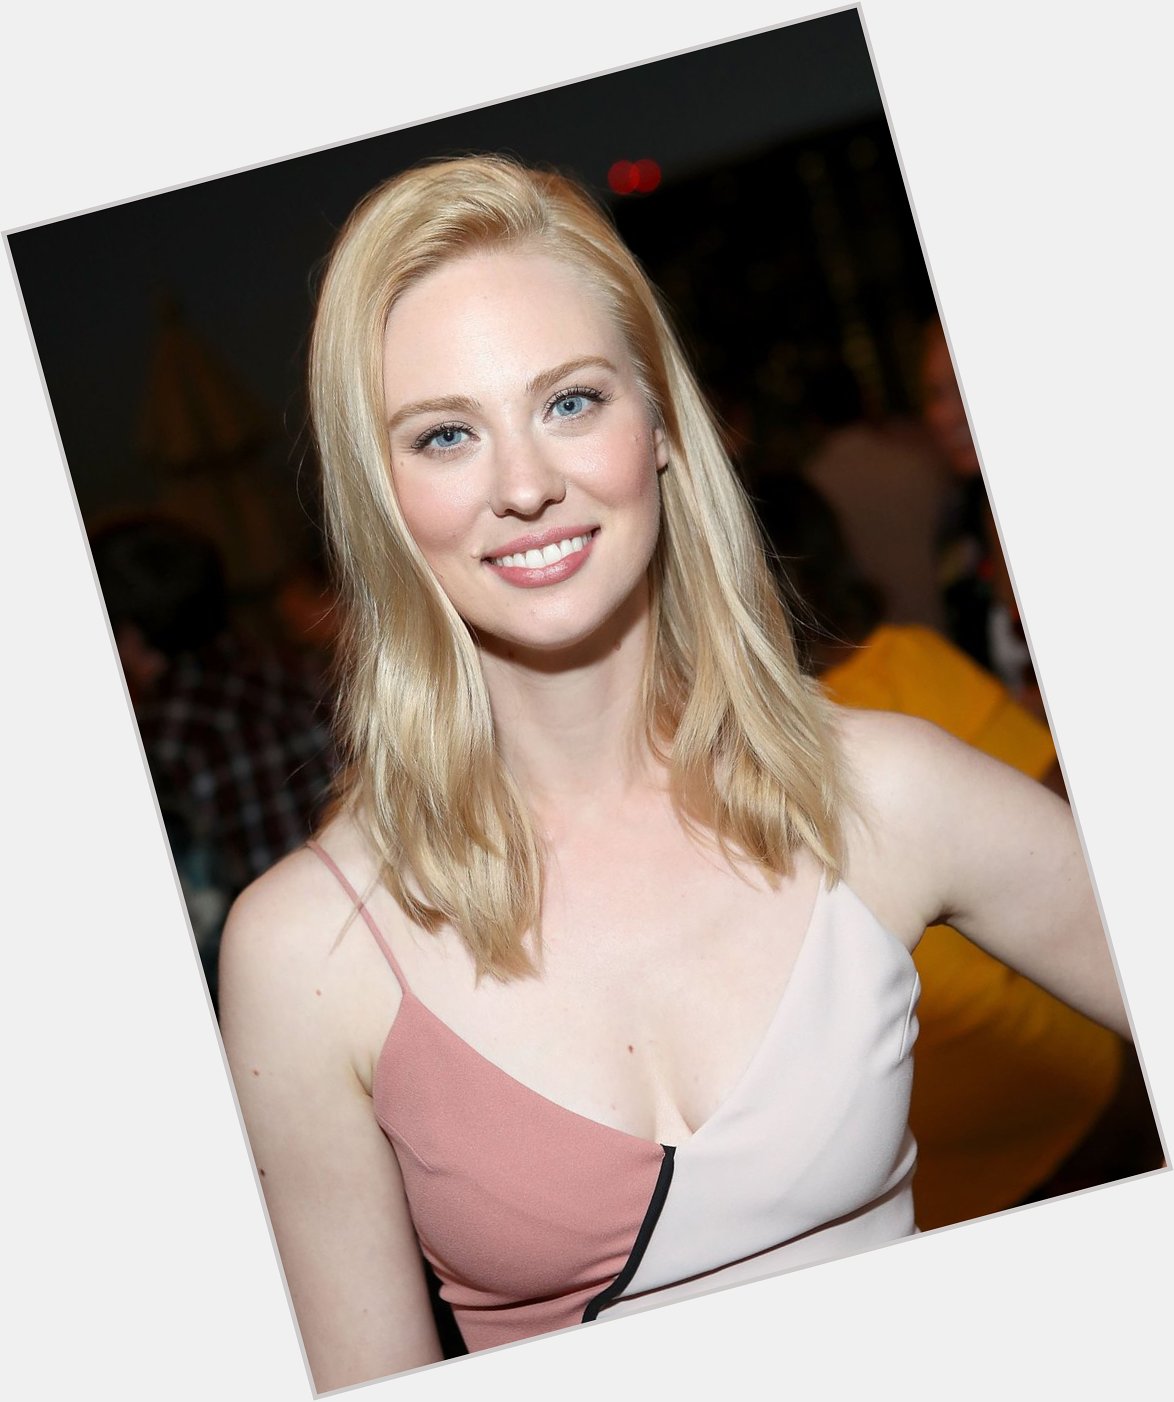 Happy birthday to Deborah Ann Woll
(February 7, 1985) 
American actress and model. 